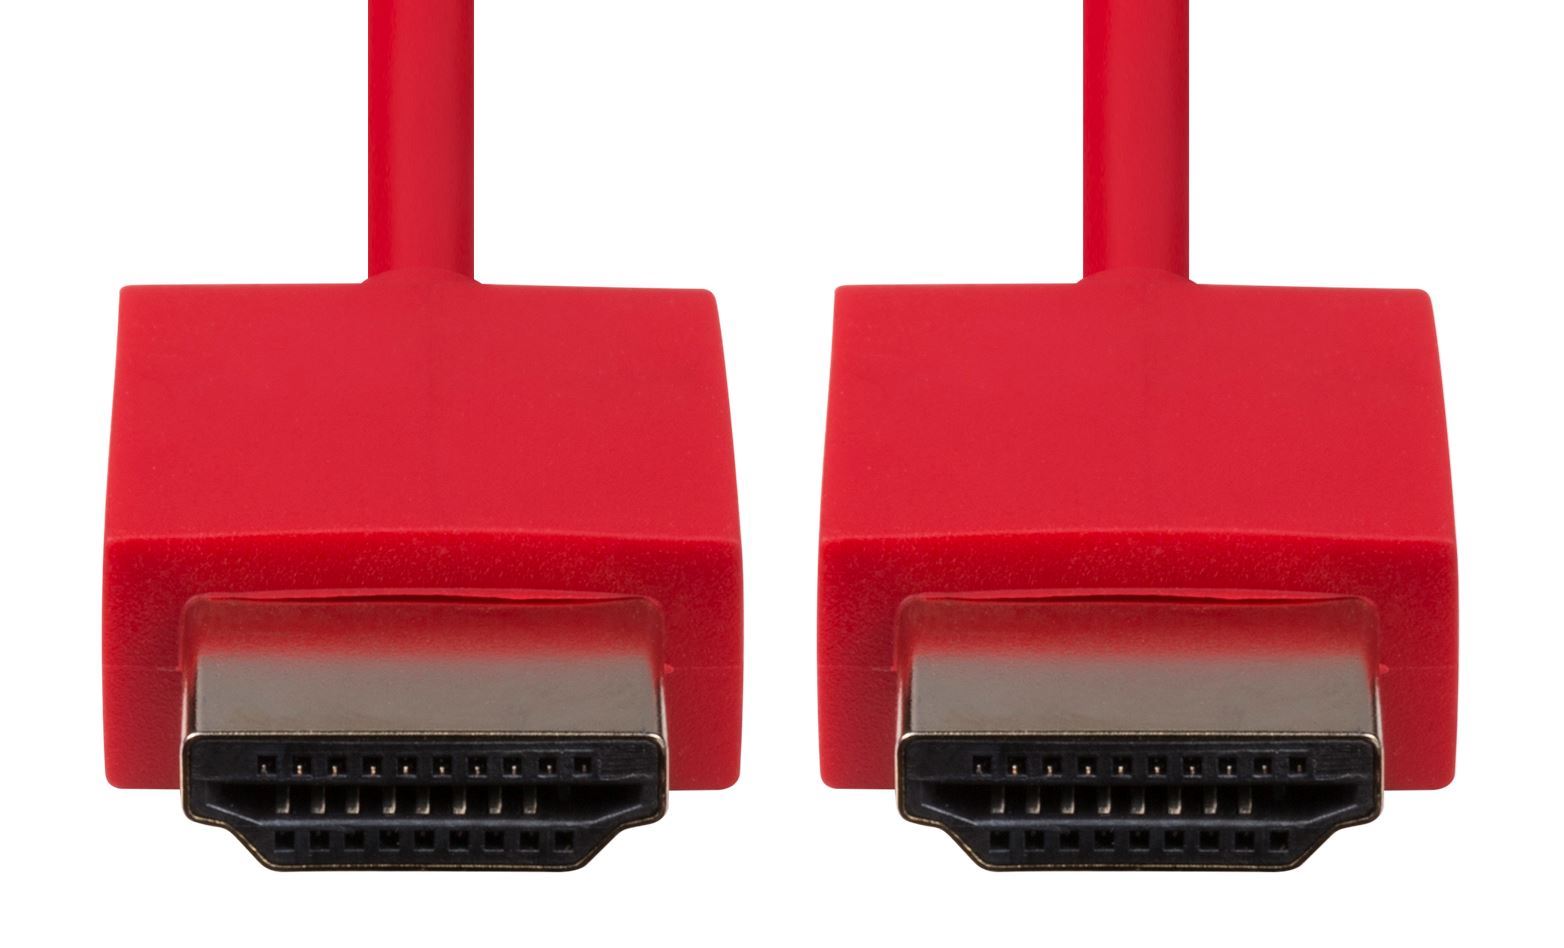 DYNAMIX_3M_HDMI_RED_Nano_High_Speed_With_Ethernet_Cable._Designed_for_UHD_Display_up_to_4K2K@60Hz._Slimline_Robust_Cable._Supports_CEC_2.0,_3D,_&_ARC._Supports_Up_to_32_Audio_Channels. 779